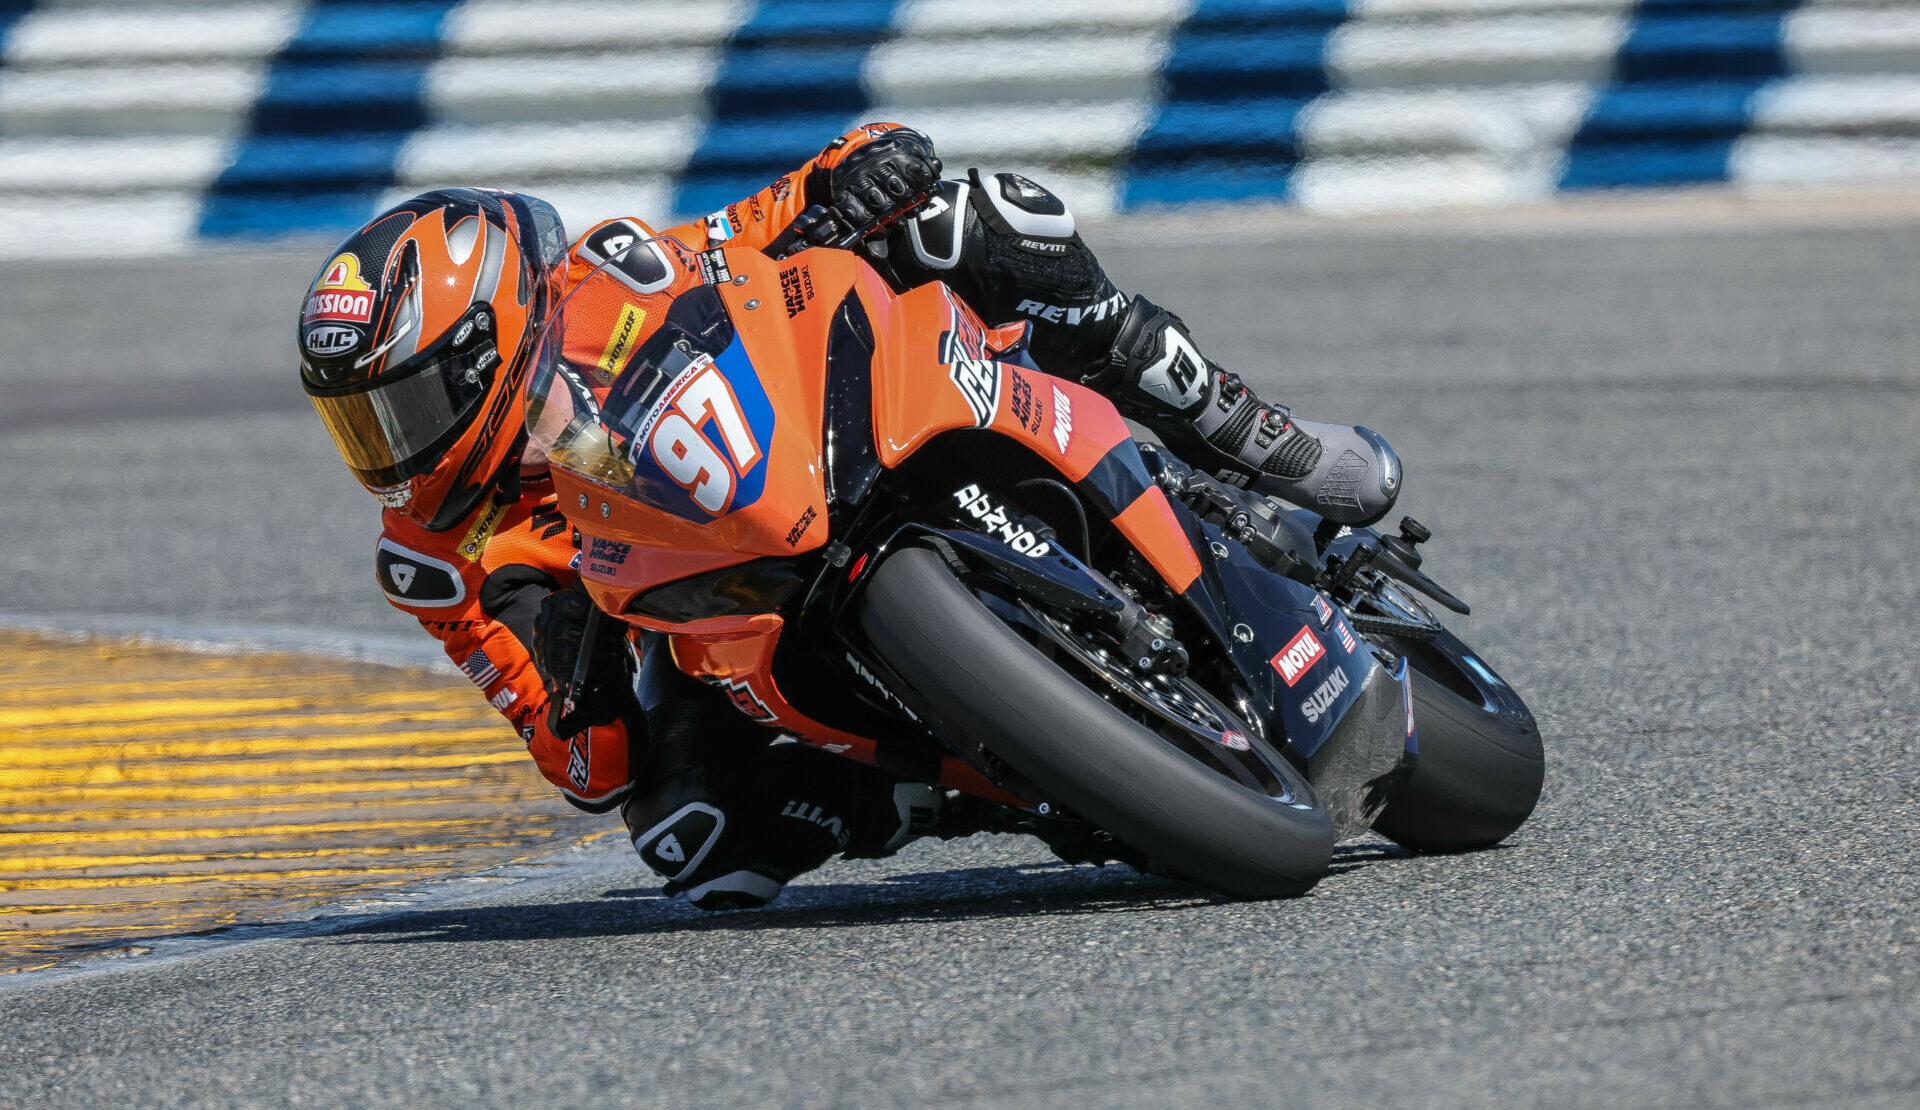 Rocco Landers (97), as seen earlier this season at Daytona. Photo by Brian J. Nelson.